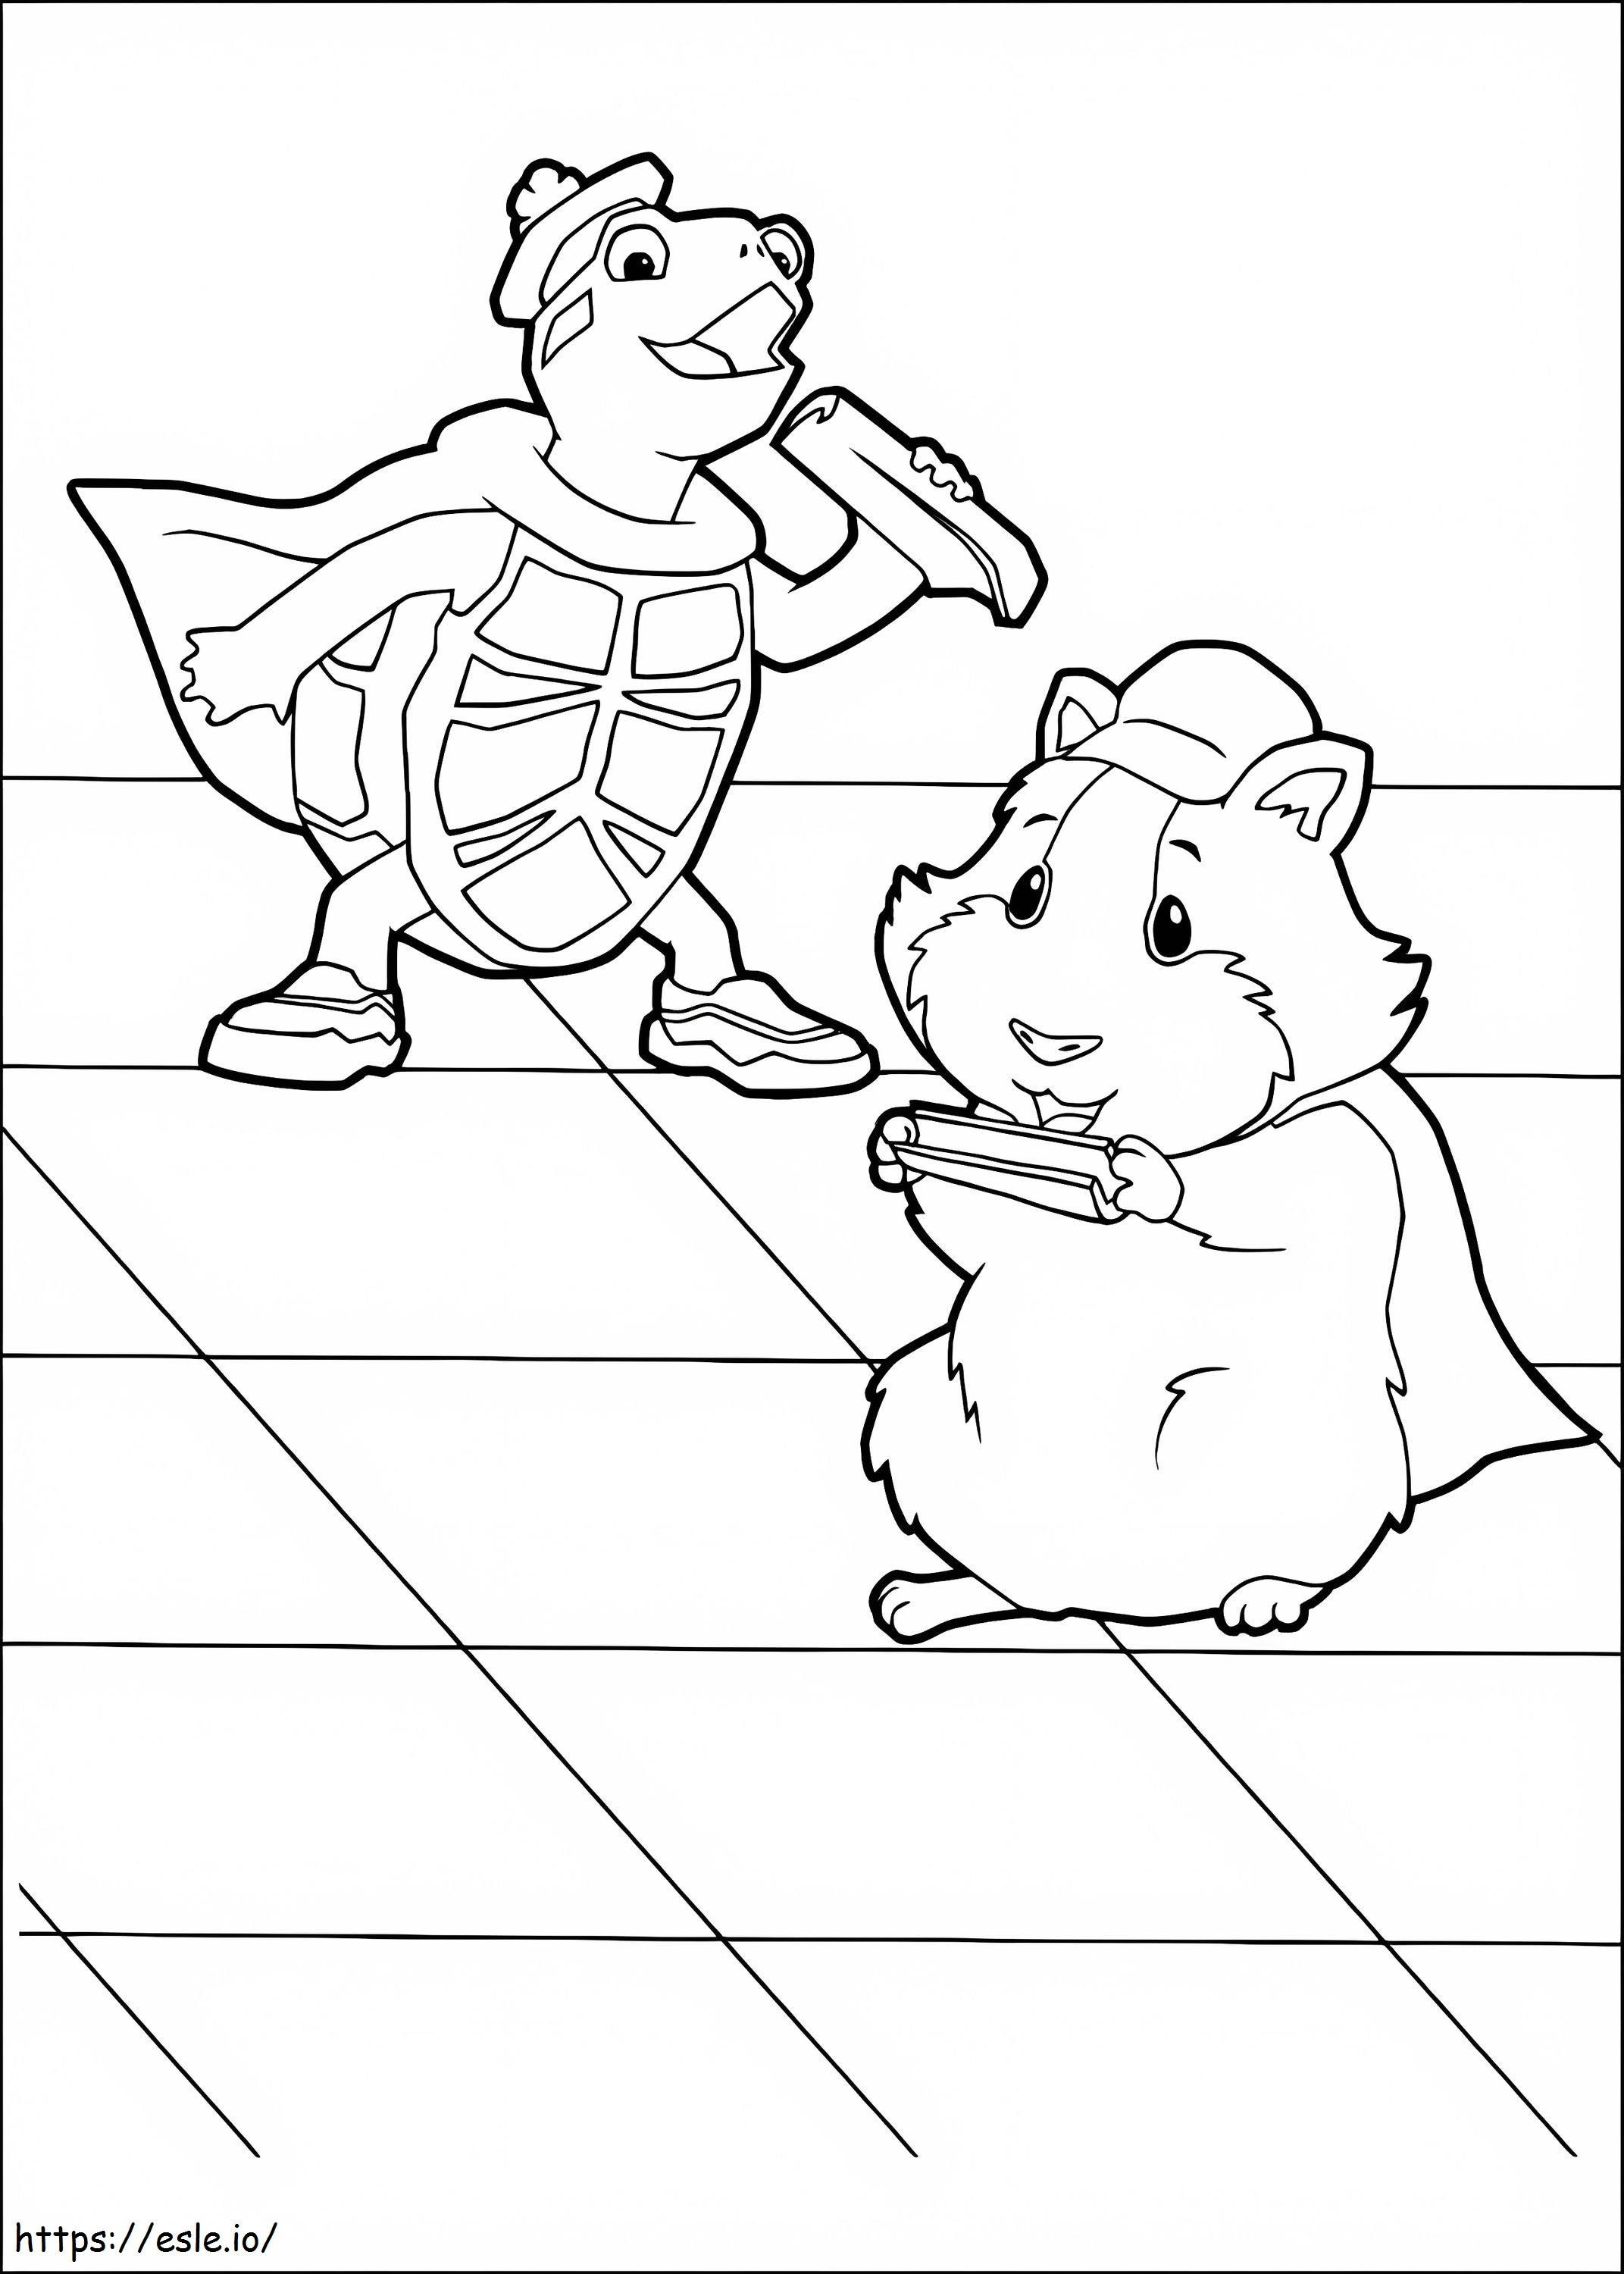 Tuck Tuck And Patito Ming Ming coloring page